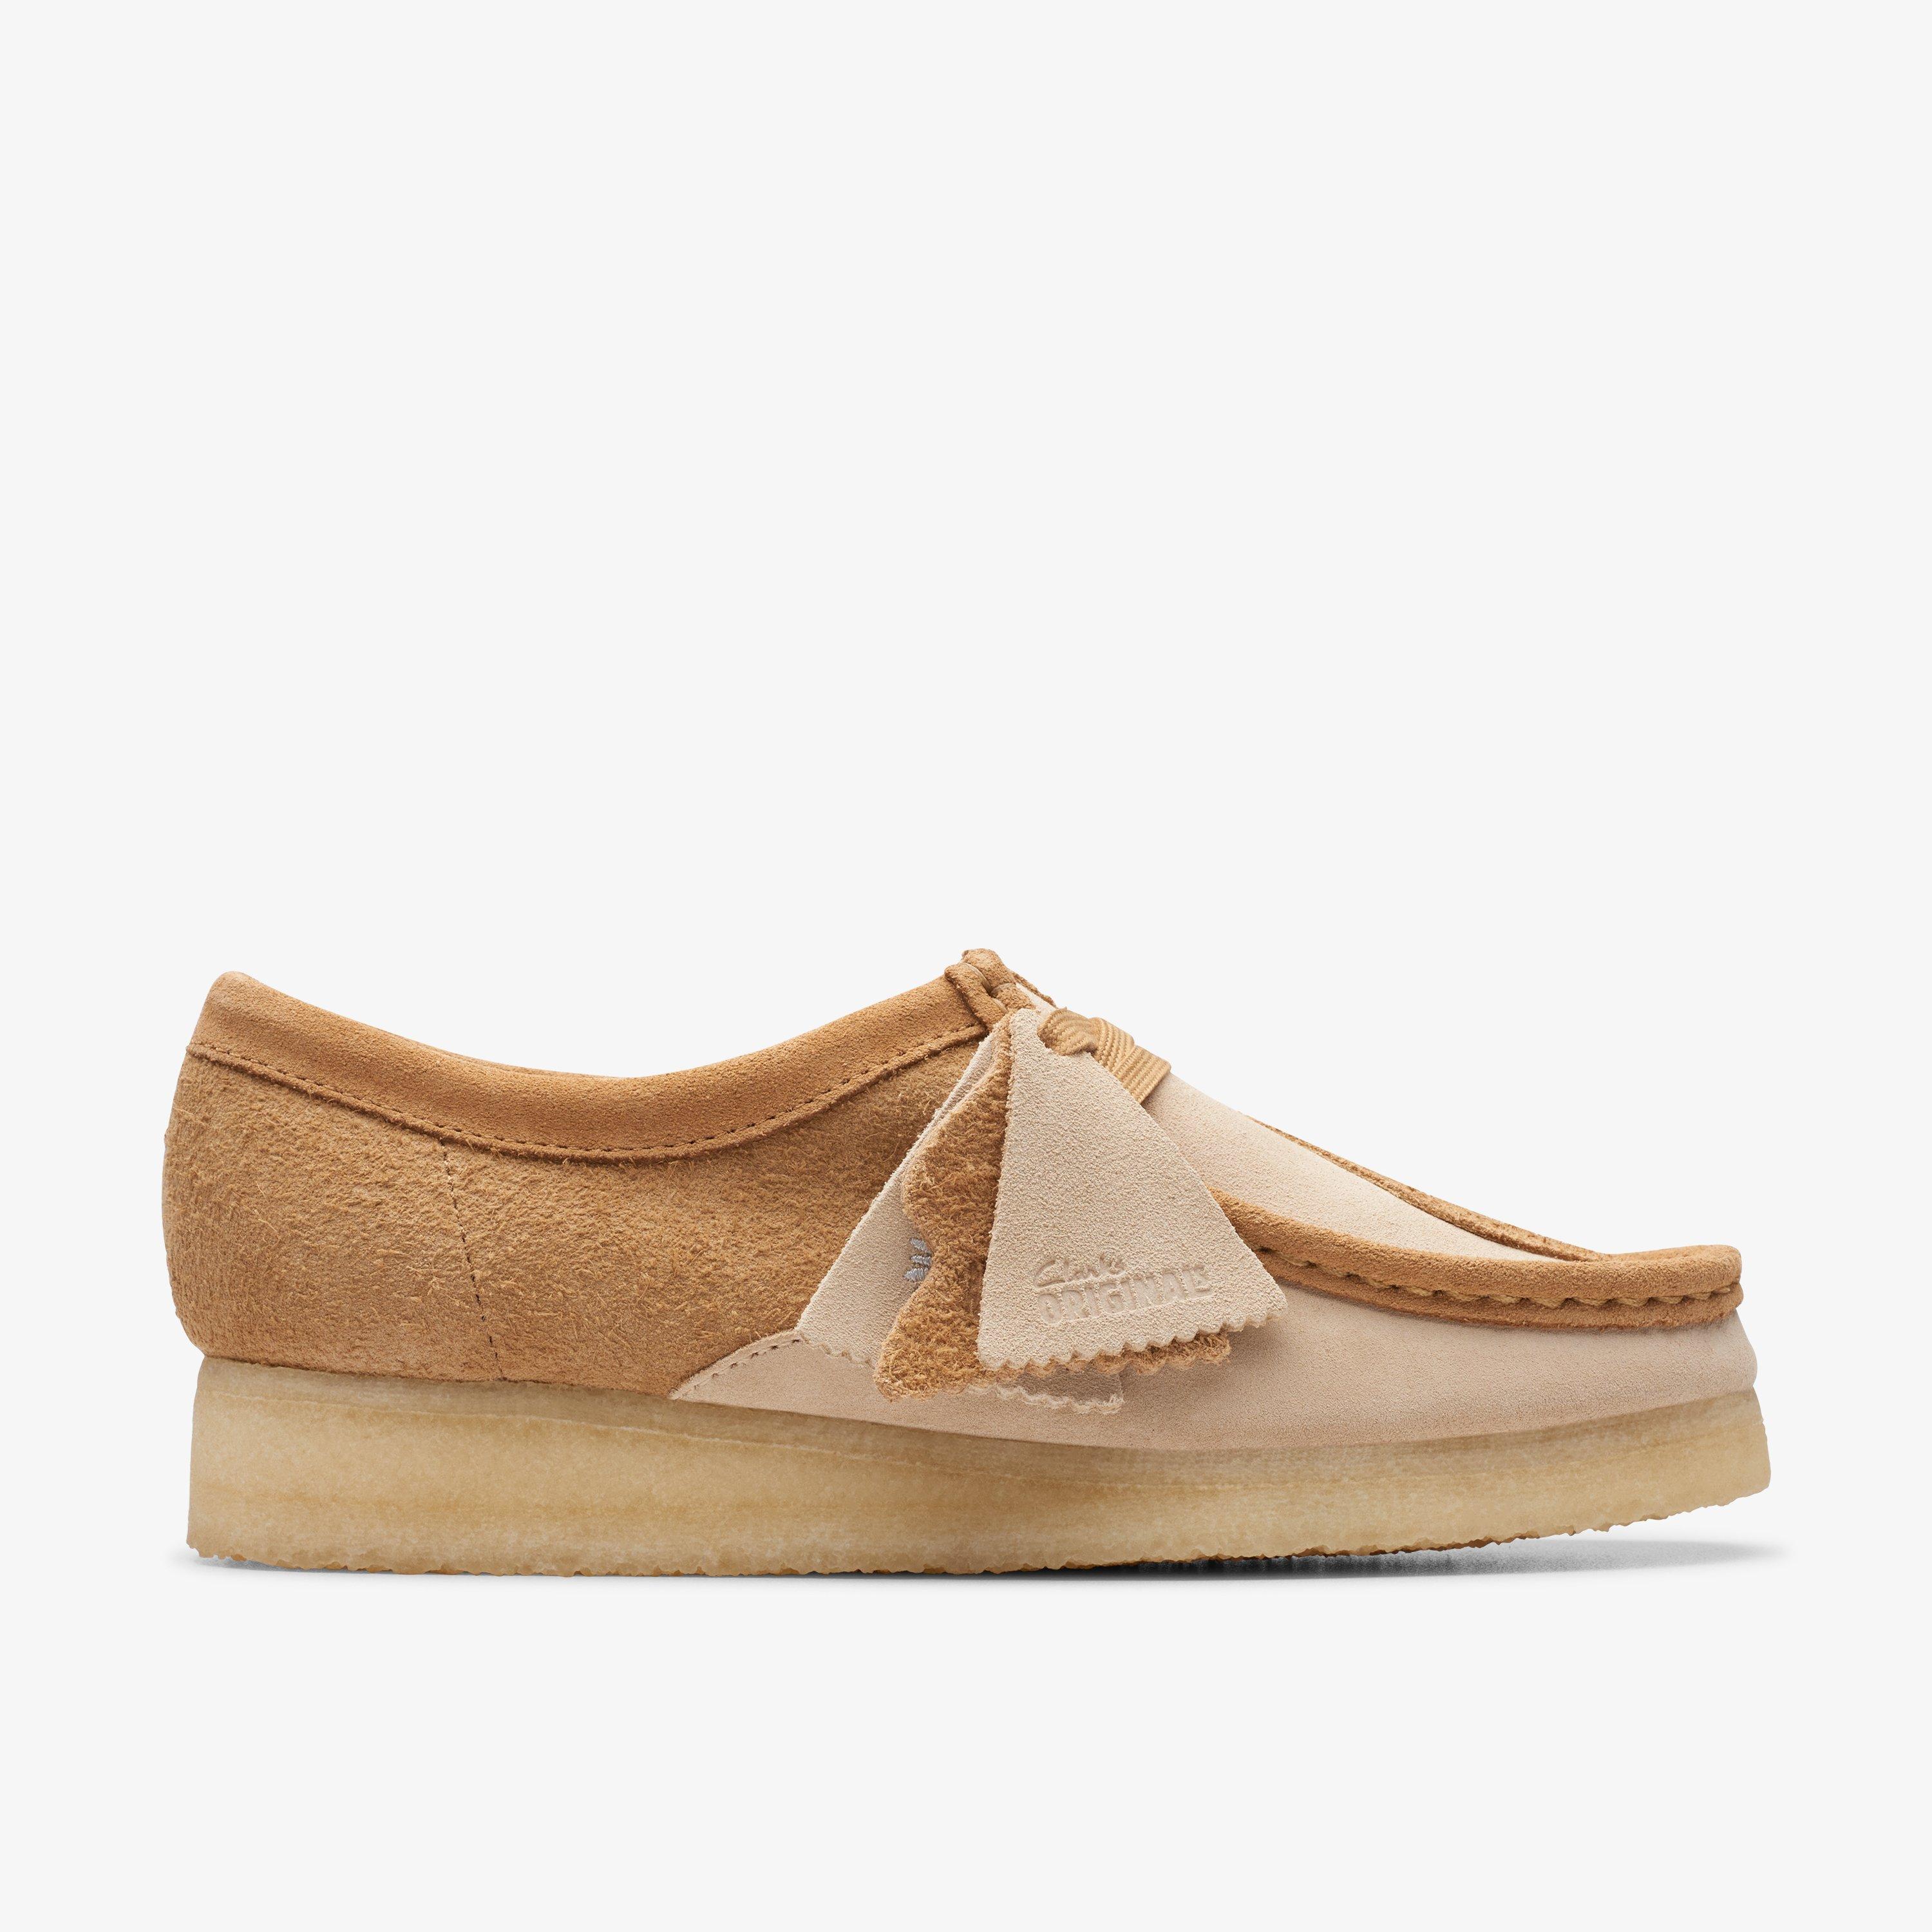 Wallabees Shoes: Clarks Originals Leather Wallabees